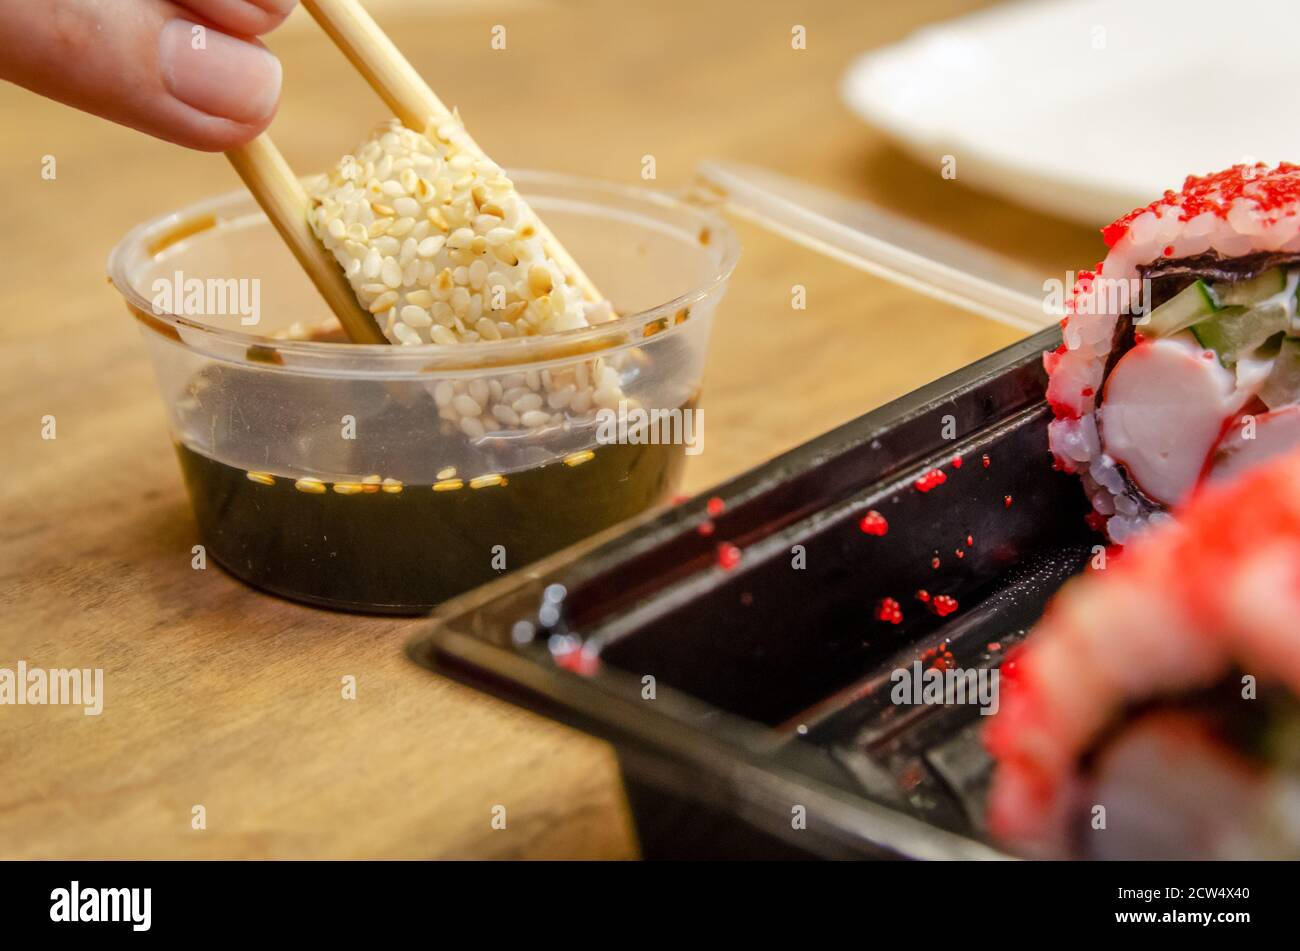 Holding sushi covered with sesame with wooden chopsticks to dip in soy sauce on a wooden table Stock Photo